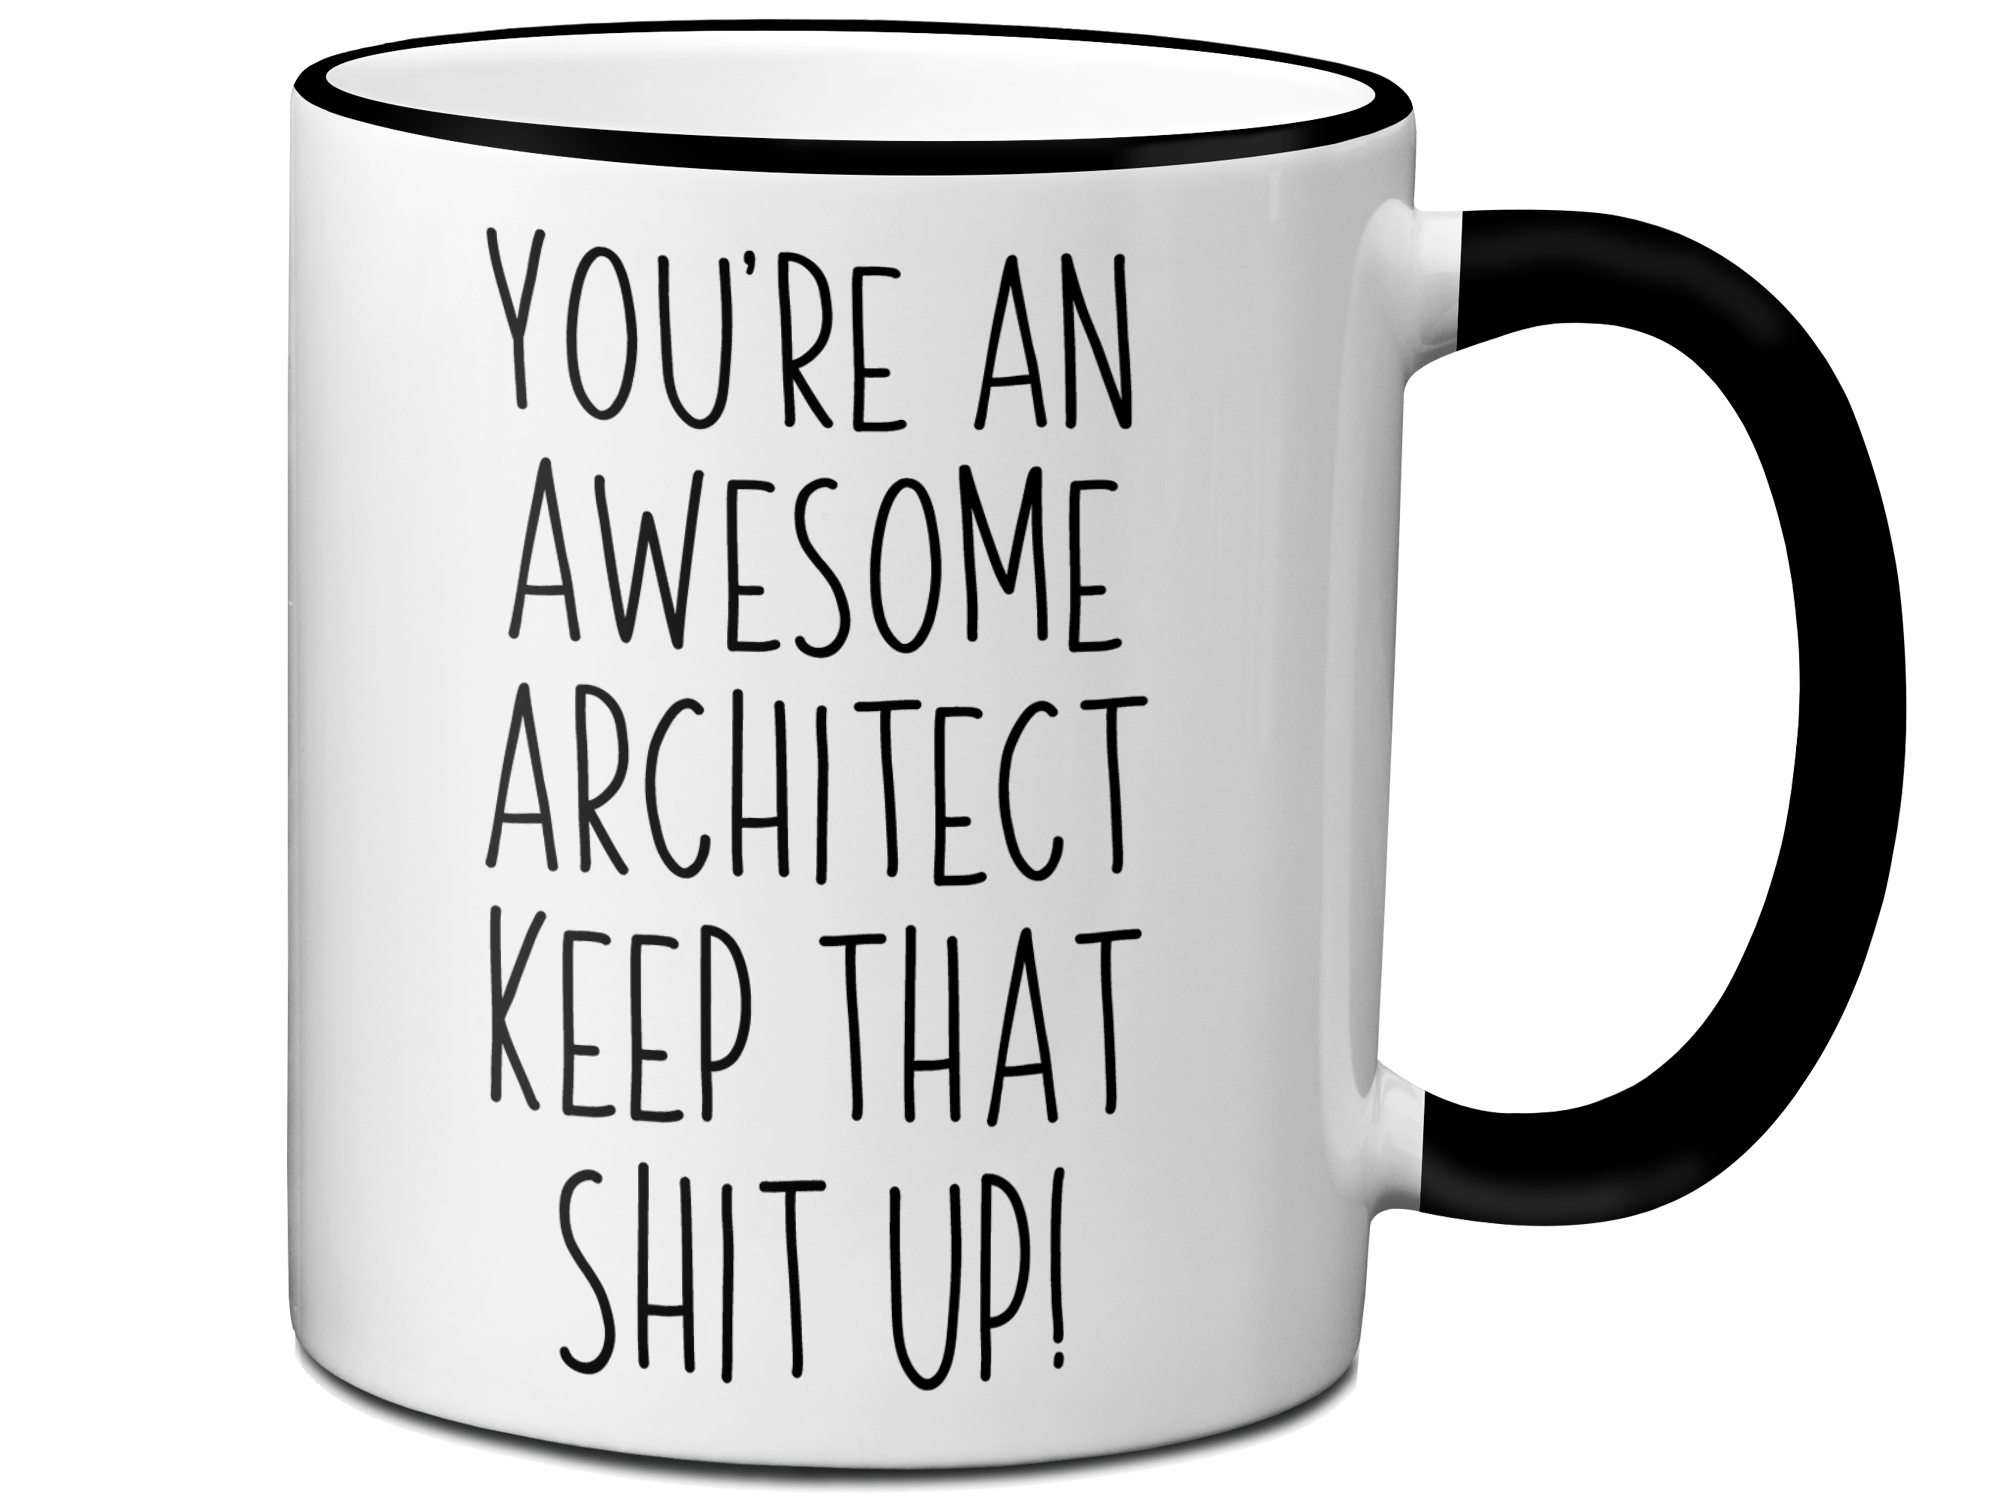 Funny Gifts for Architects - You're an Awesome Architect Keep That Shit Up Coffee Mug